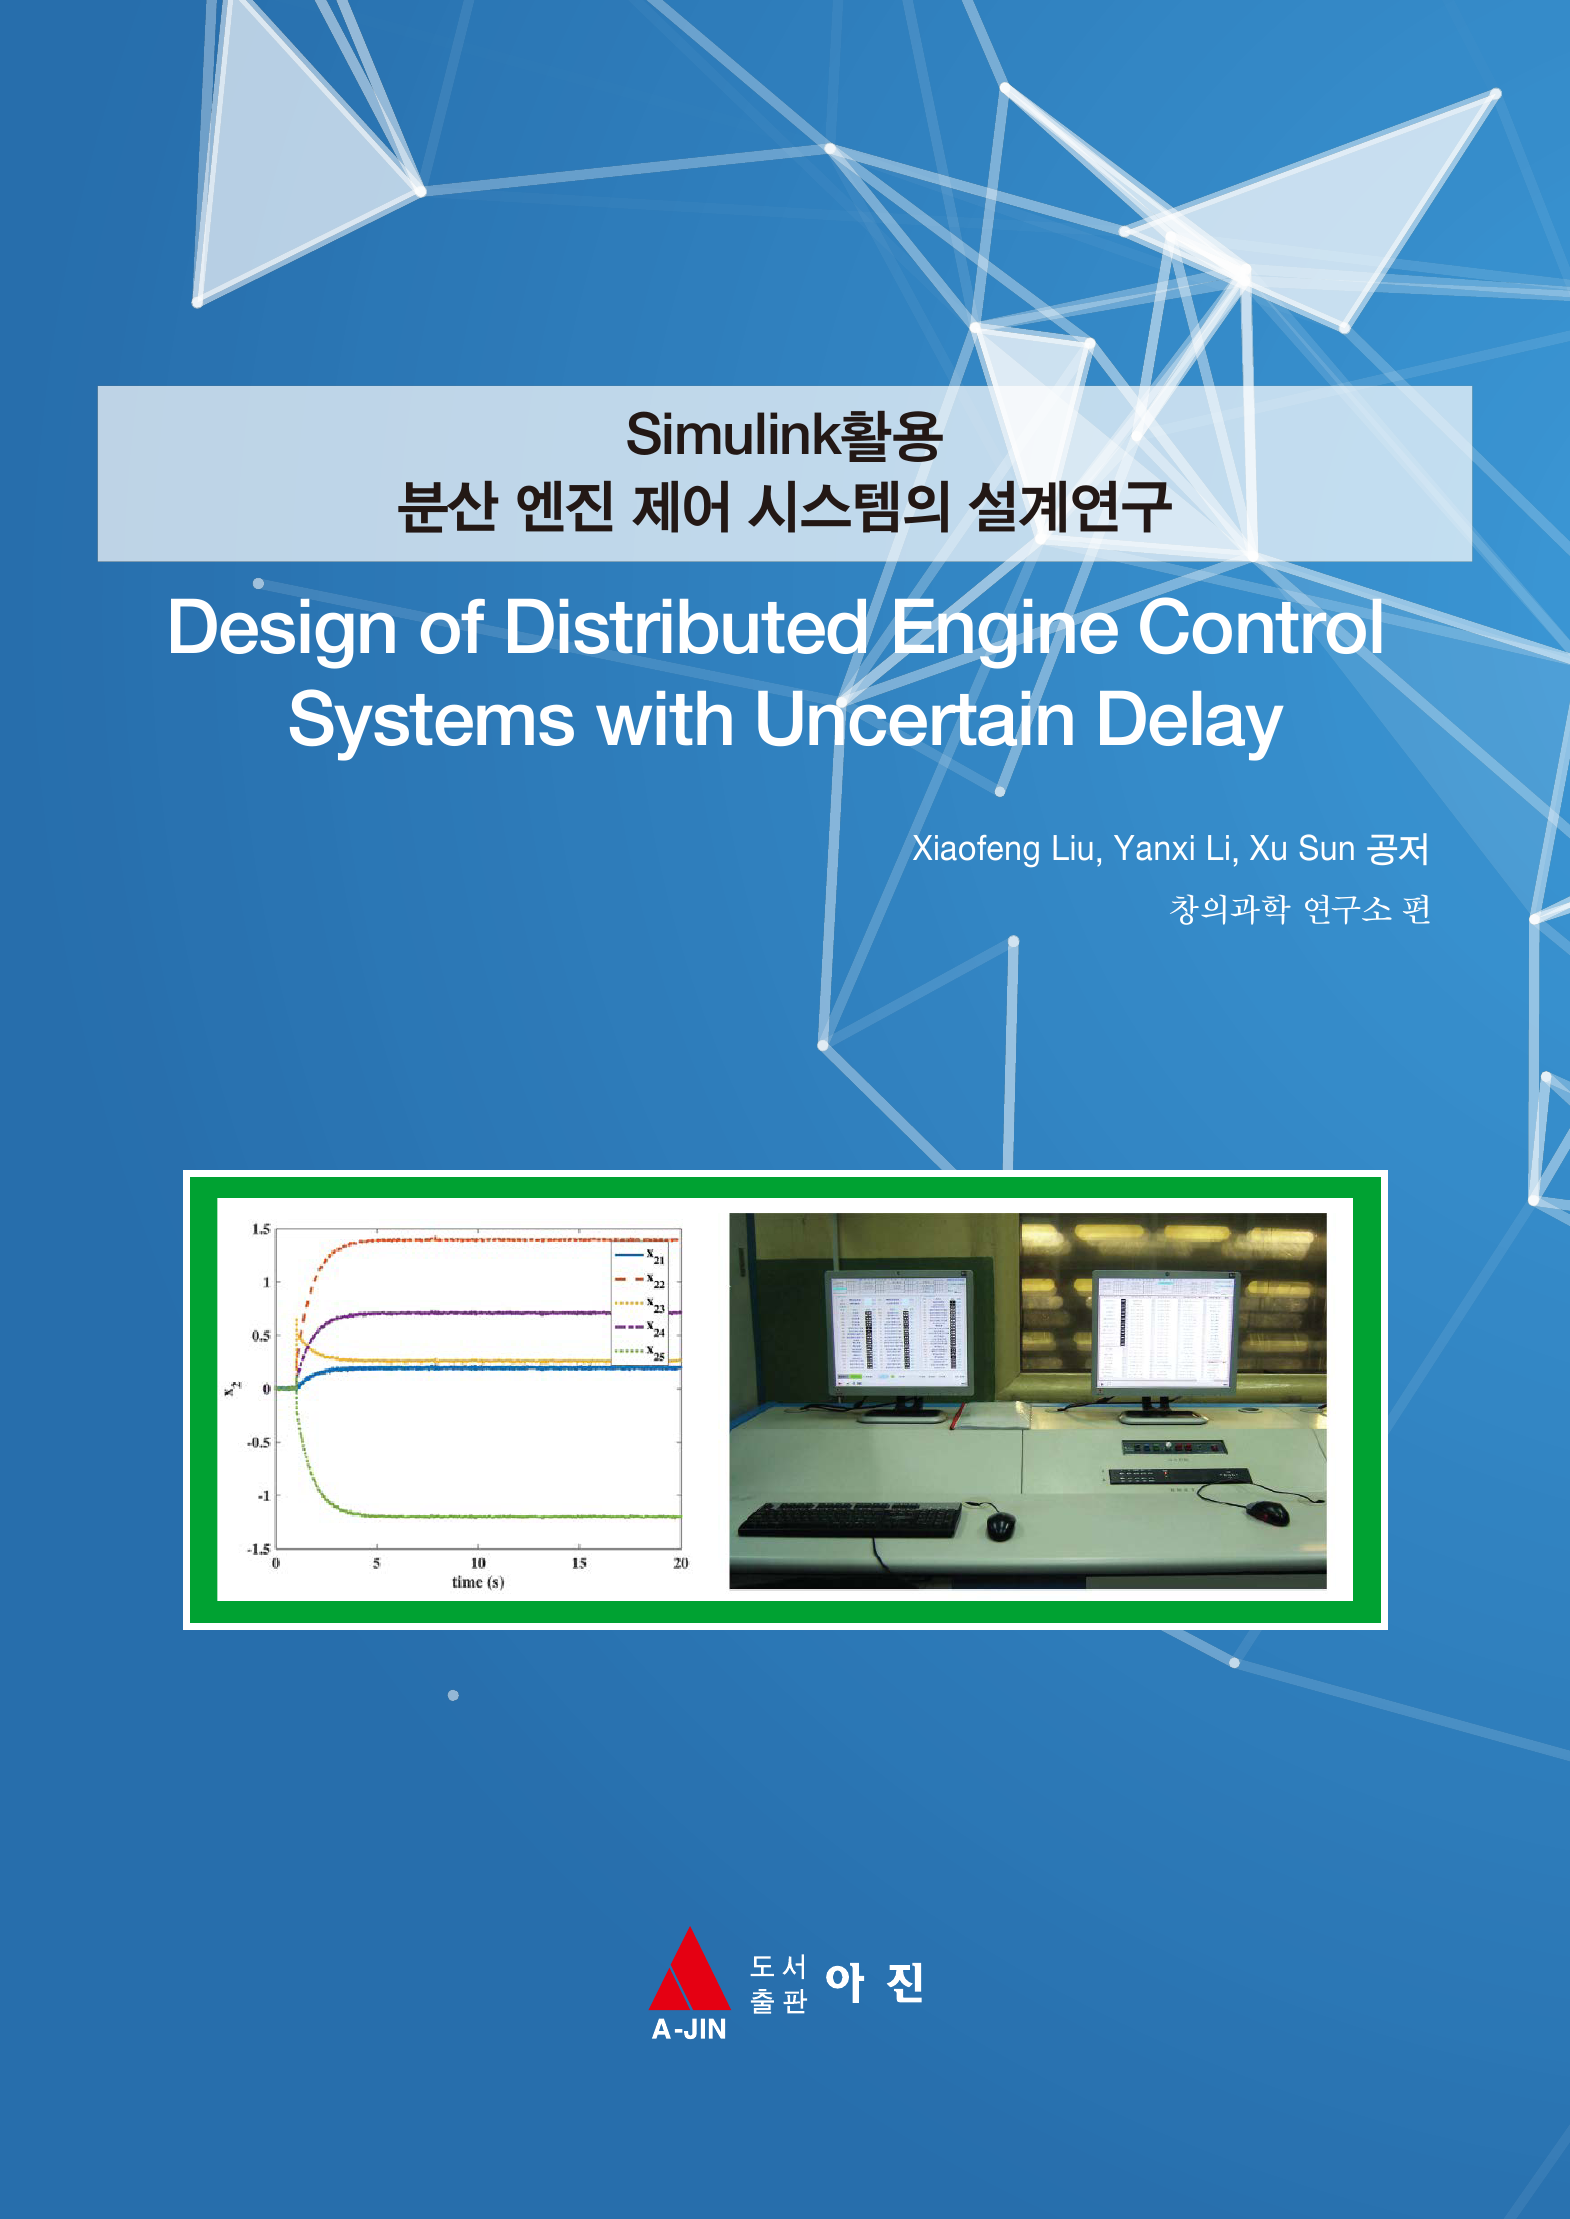 Simulink활용 분산 엔진 제어 시스템의 설계연구(Design of Distributed Engine Control Systems with Uncertain Delay)